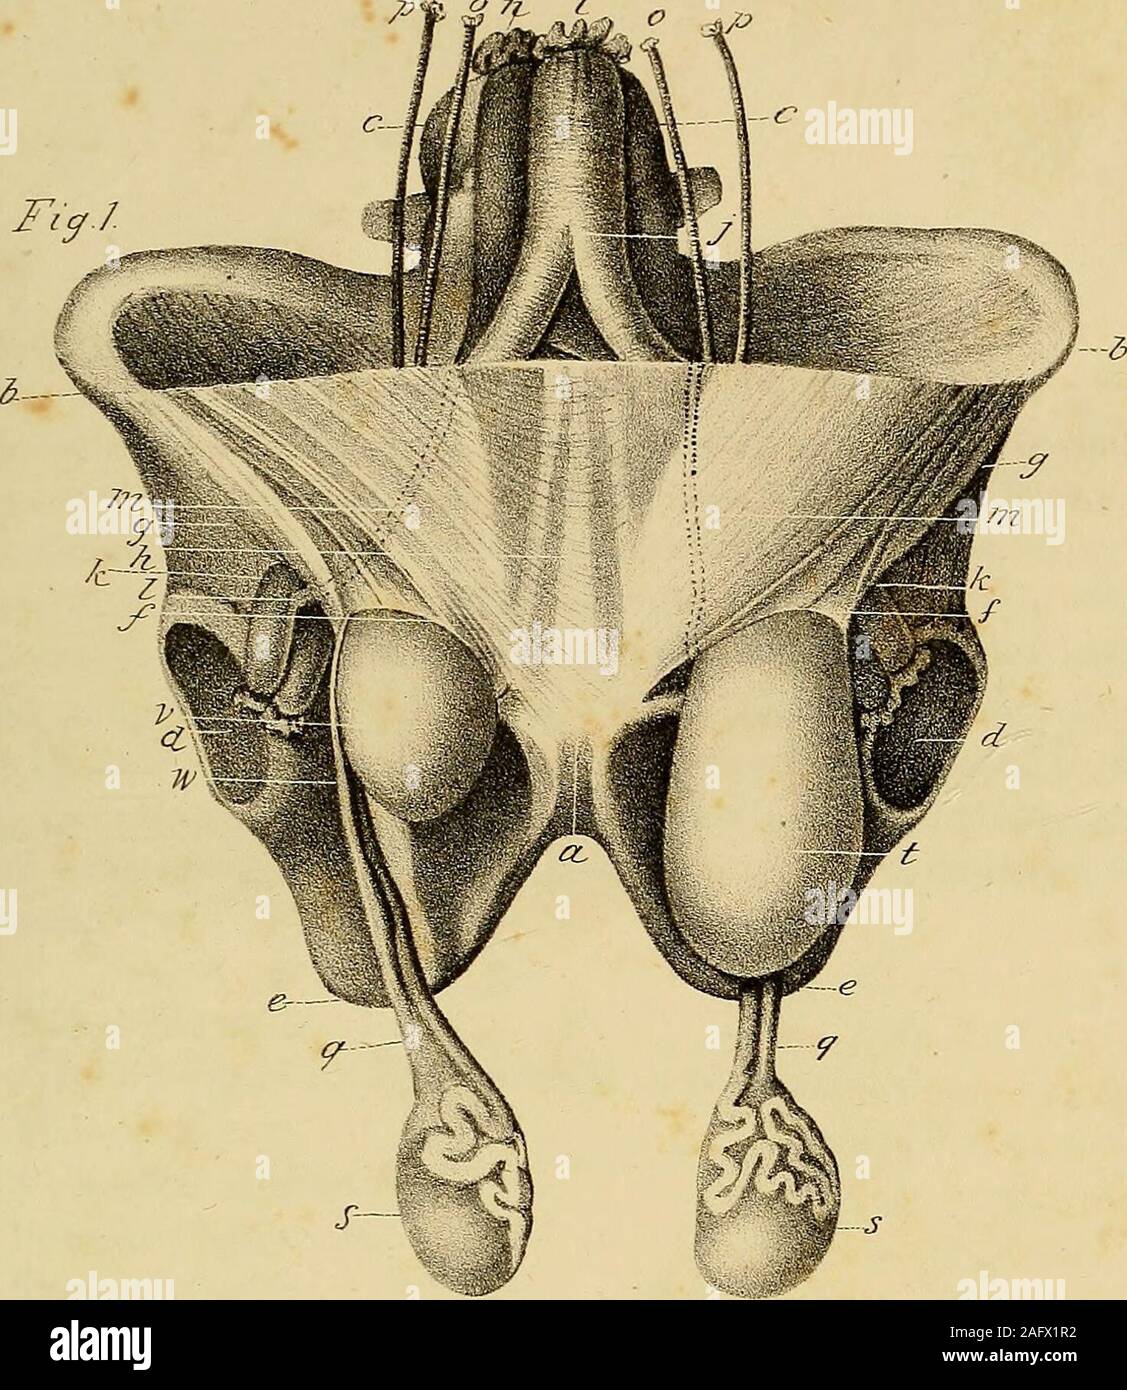 . The anatomy and surgical treatment of abdominal hernia. on the opposite side. EXPLANATION OF PLATE VII.-%2. An internal view of the same preparation showing the orifice of thehernial sacs, with the relative situations of the epigastric and spermaticvessels. a. Symphysis pubis. b. Anterior superior spinous process of the ilium, c. The spine.d d d d. Abdominal muscles drawn downwards to show the cavity of the pelvis. e. The bladder. f. The rectum. g. Bifurcation of the aorta.h. The inferior cava.i i. Spermatic arteries.k k. Spermatic veins.I. Vas deferens.m m. Epigastric arteries and veins.n n Stock Photo